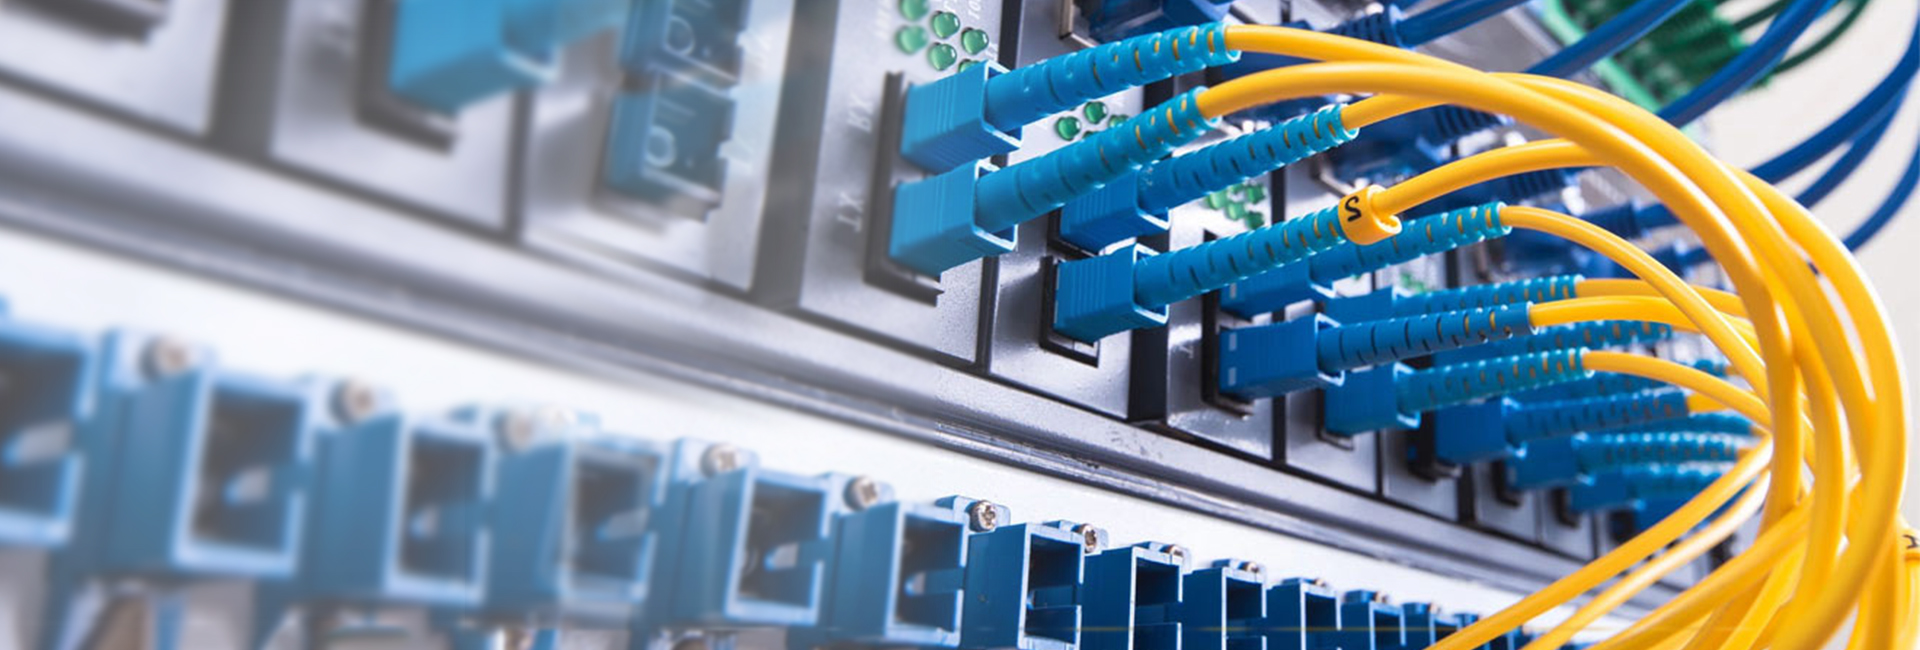 Network Cabling <br>Products